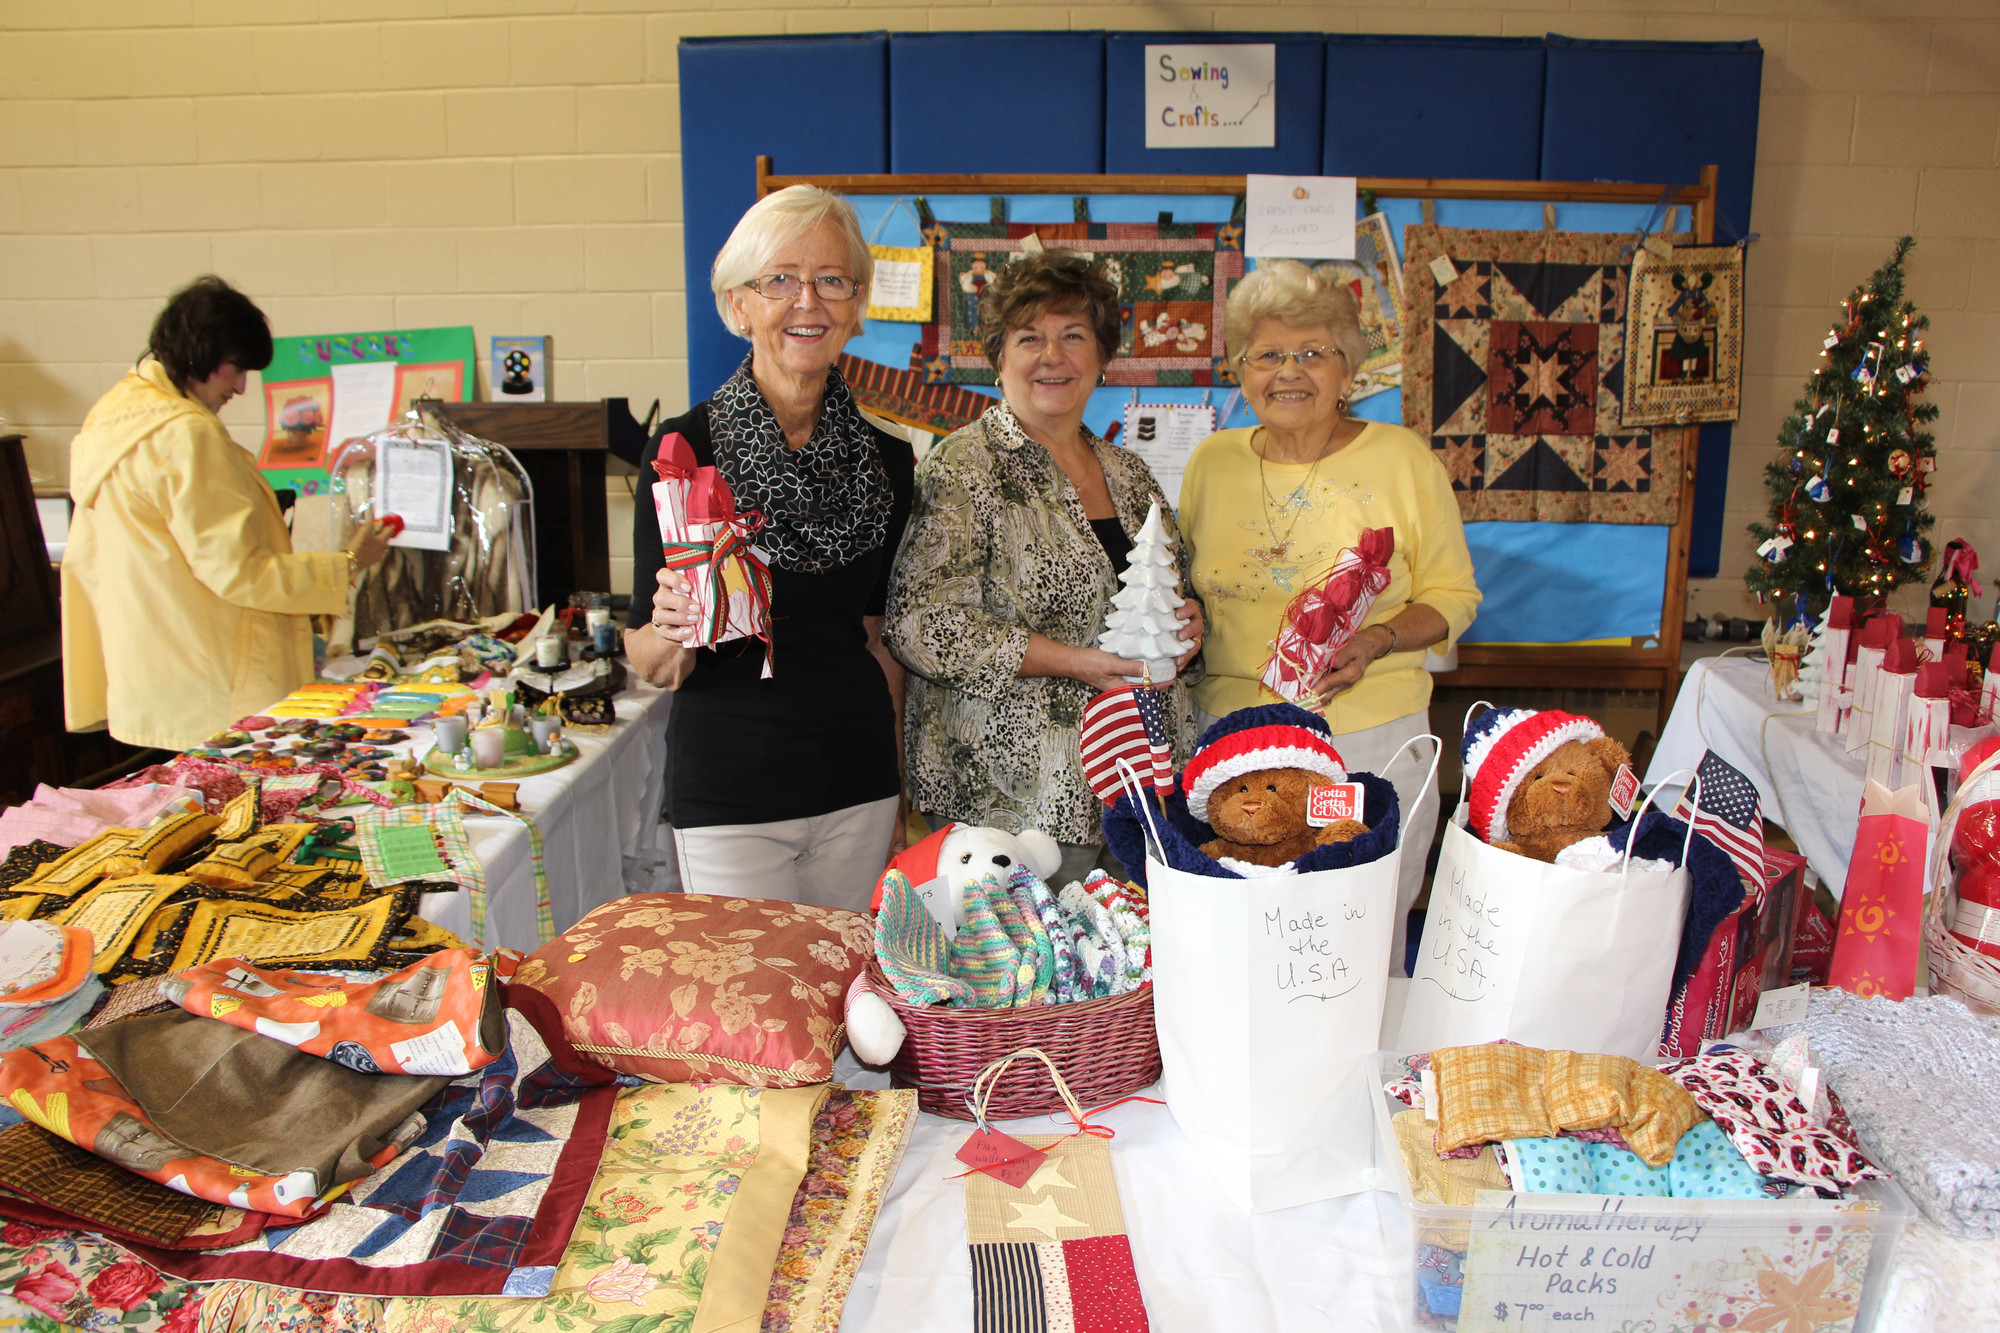 Brit Birkelund, left, Eileen Dubnham, center, and Arylnn Streithorst had many holiday crafts and home decorations available for purchase.